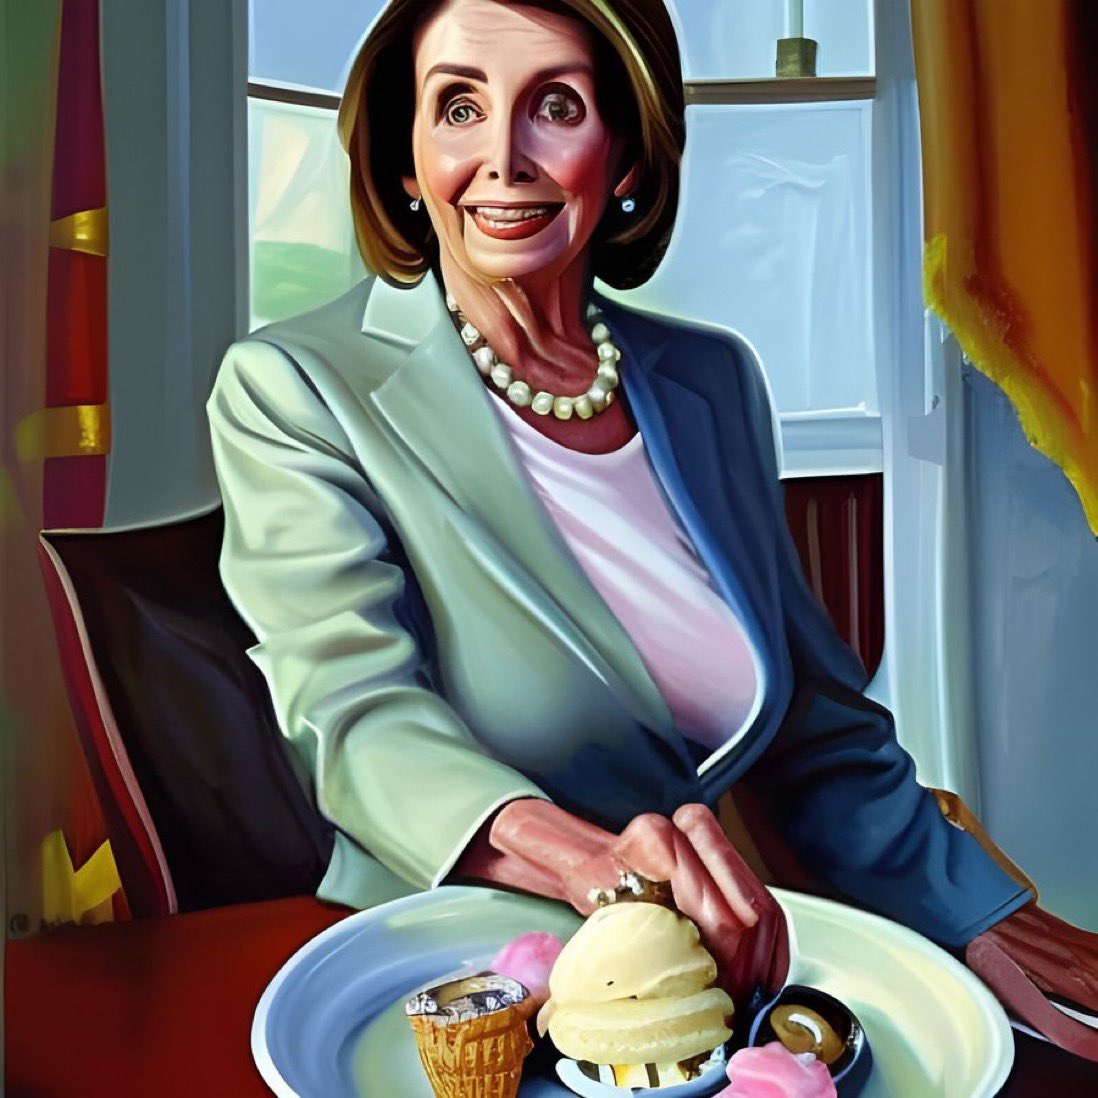 Do you agree Nancy Pelosi set up innocent Americans on January 6th at the U.S. Capitol? YES or NO?